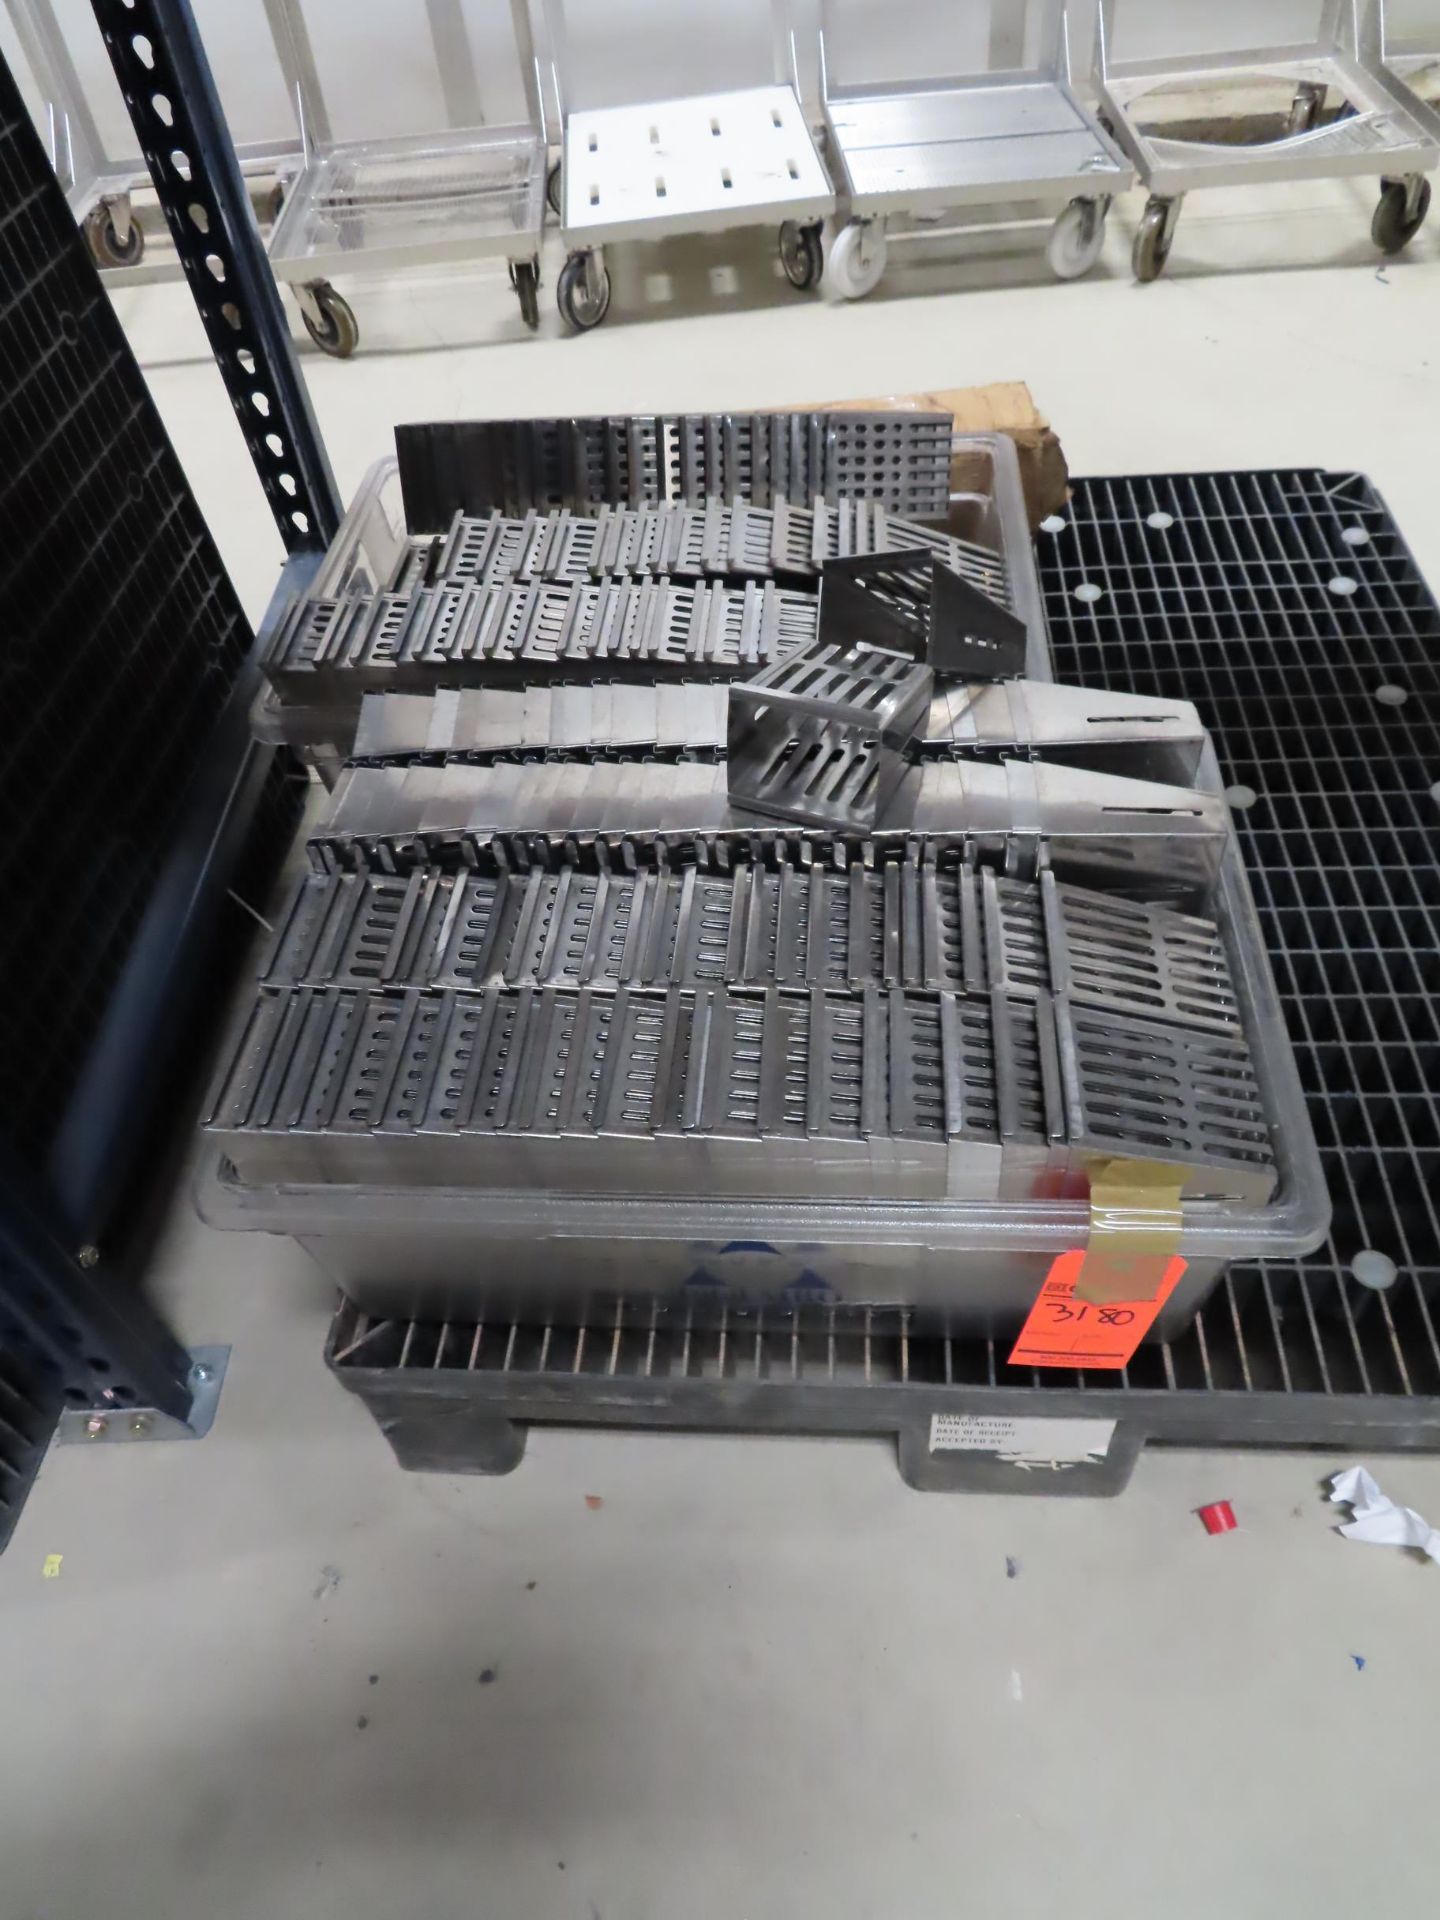 Lot of assorted stainless steel cage accessories, sipper sack holders, donnage shelving, etc. - Image 8 of 9